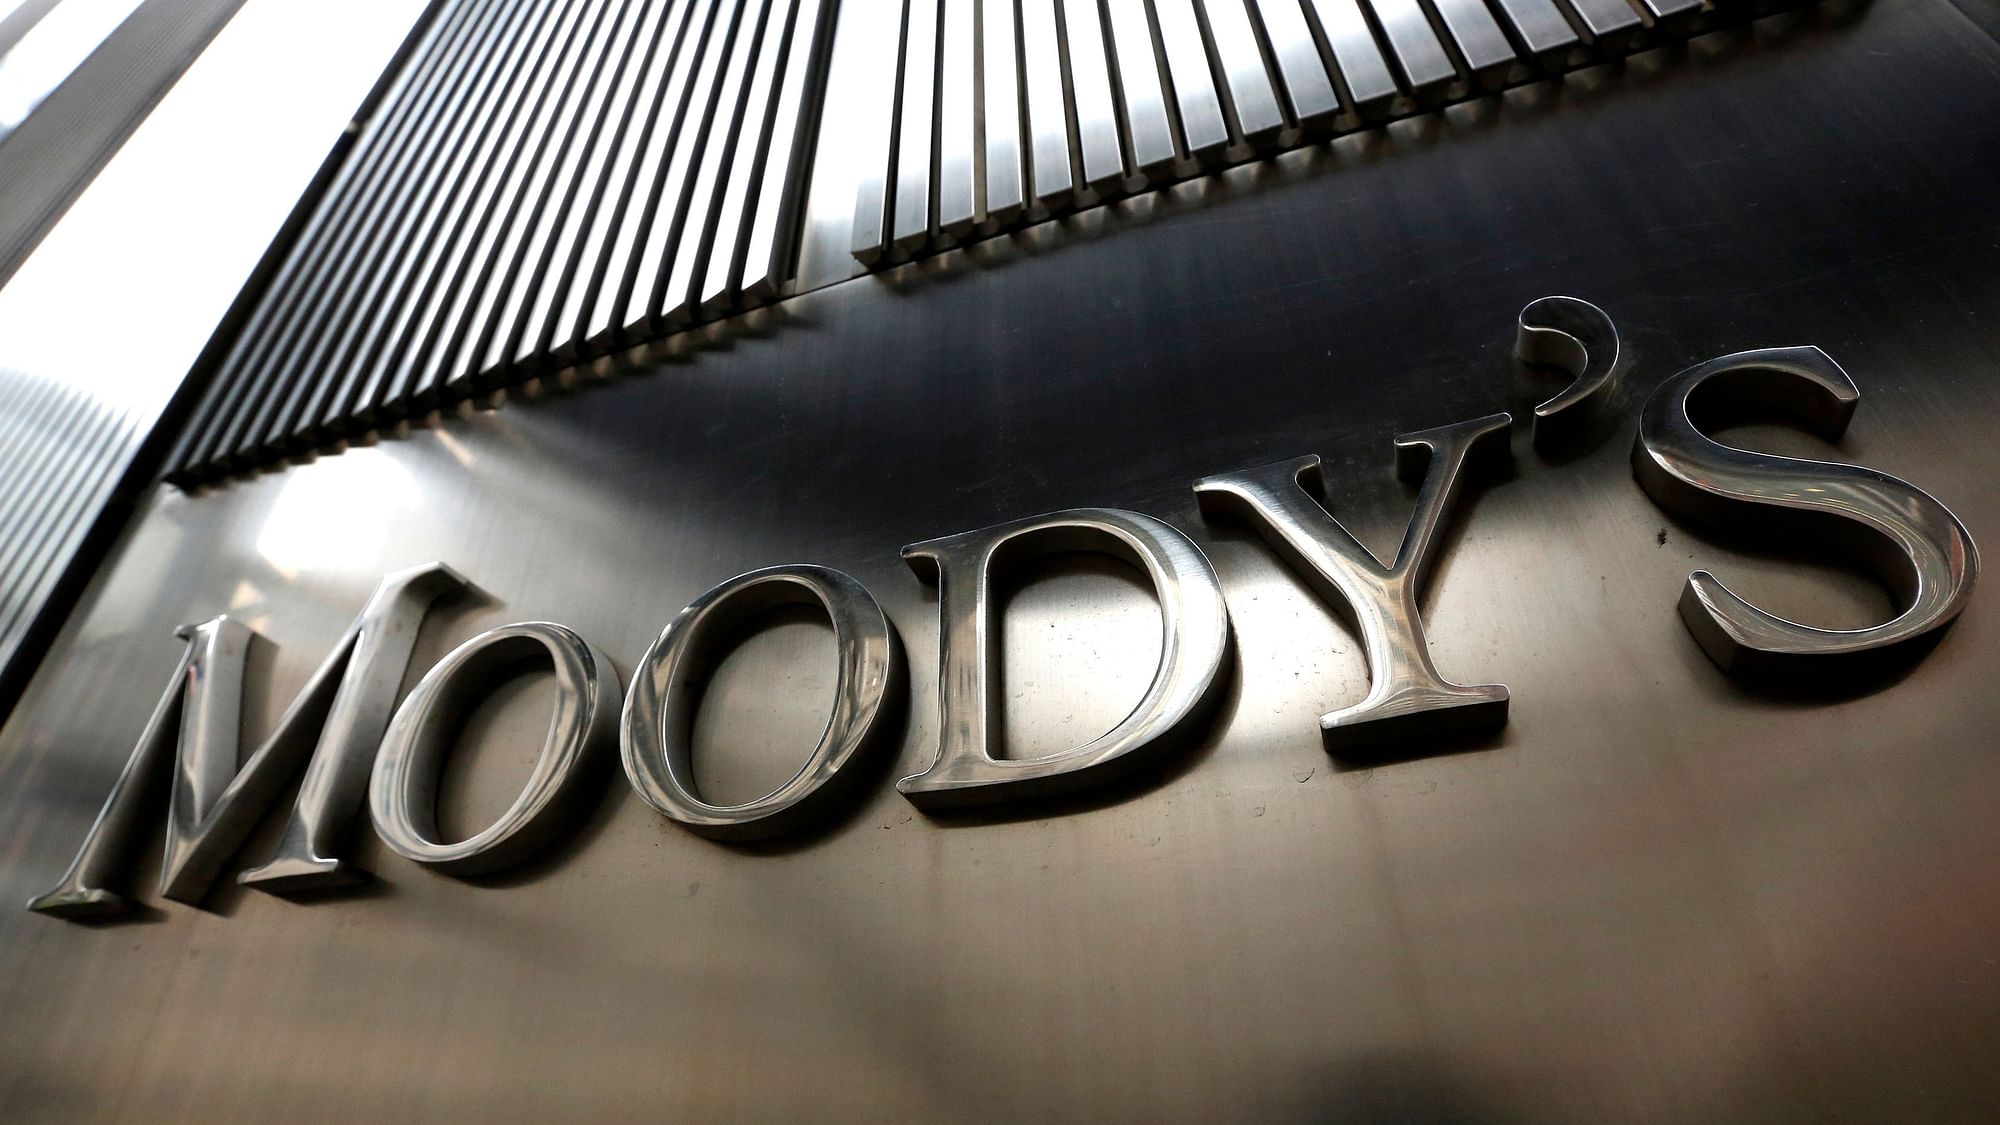 Moody’s Cuts India’s Growth Projection for 2020 from 6.6 to 5.4